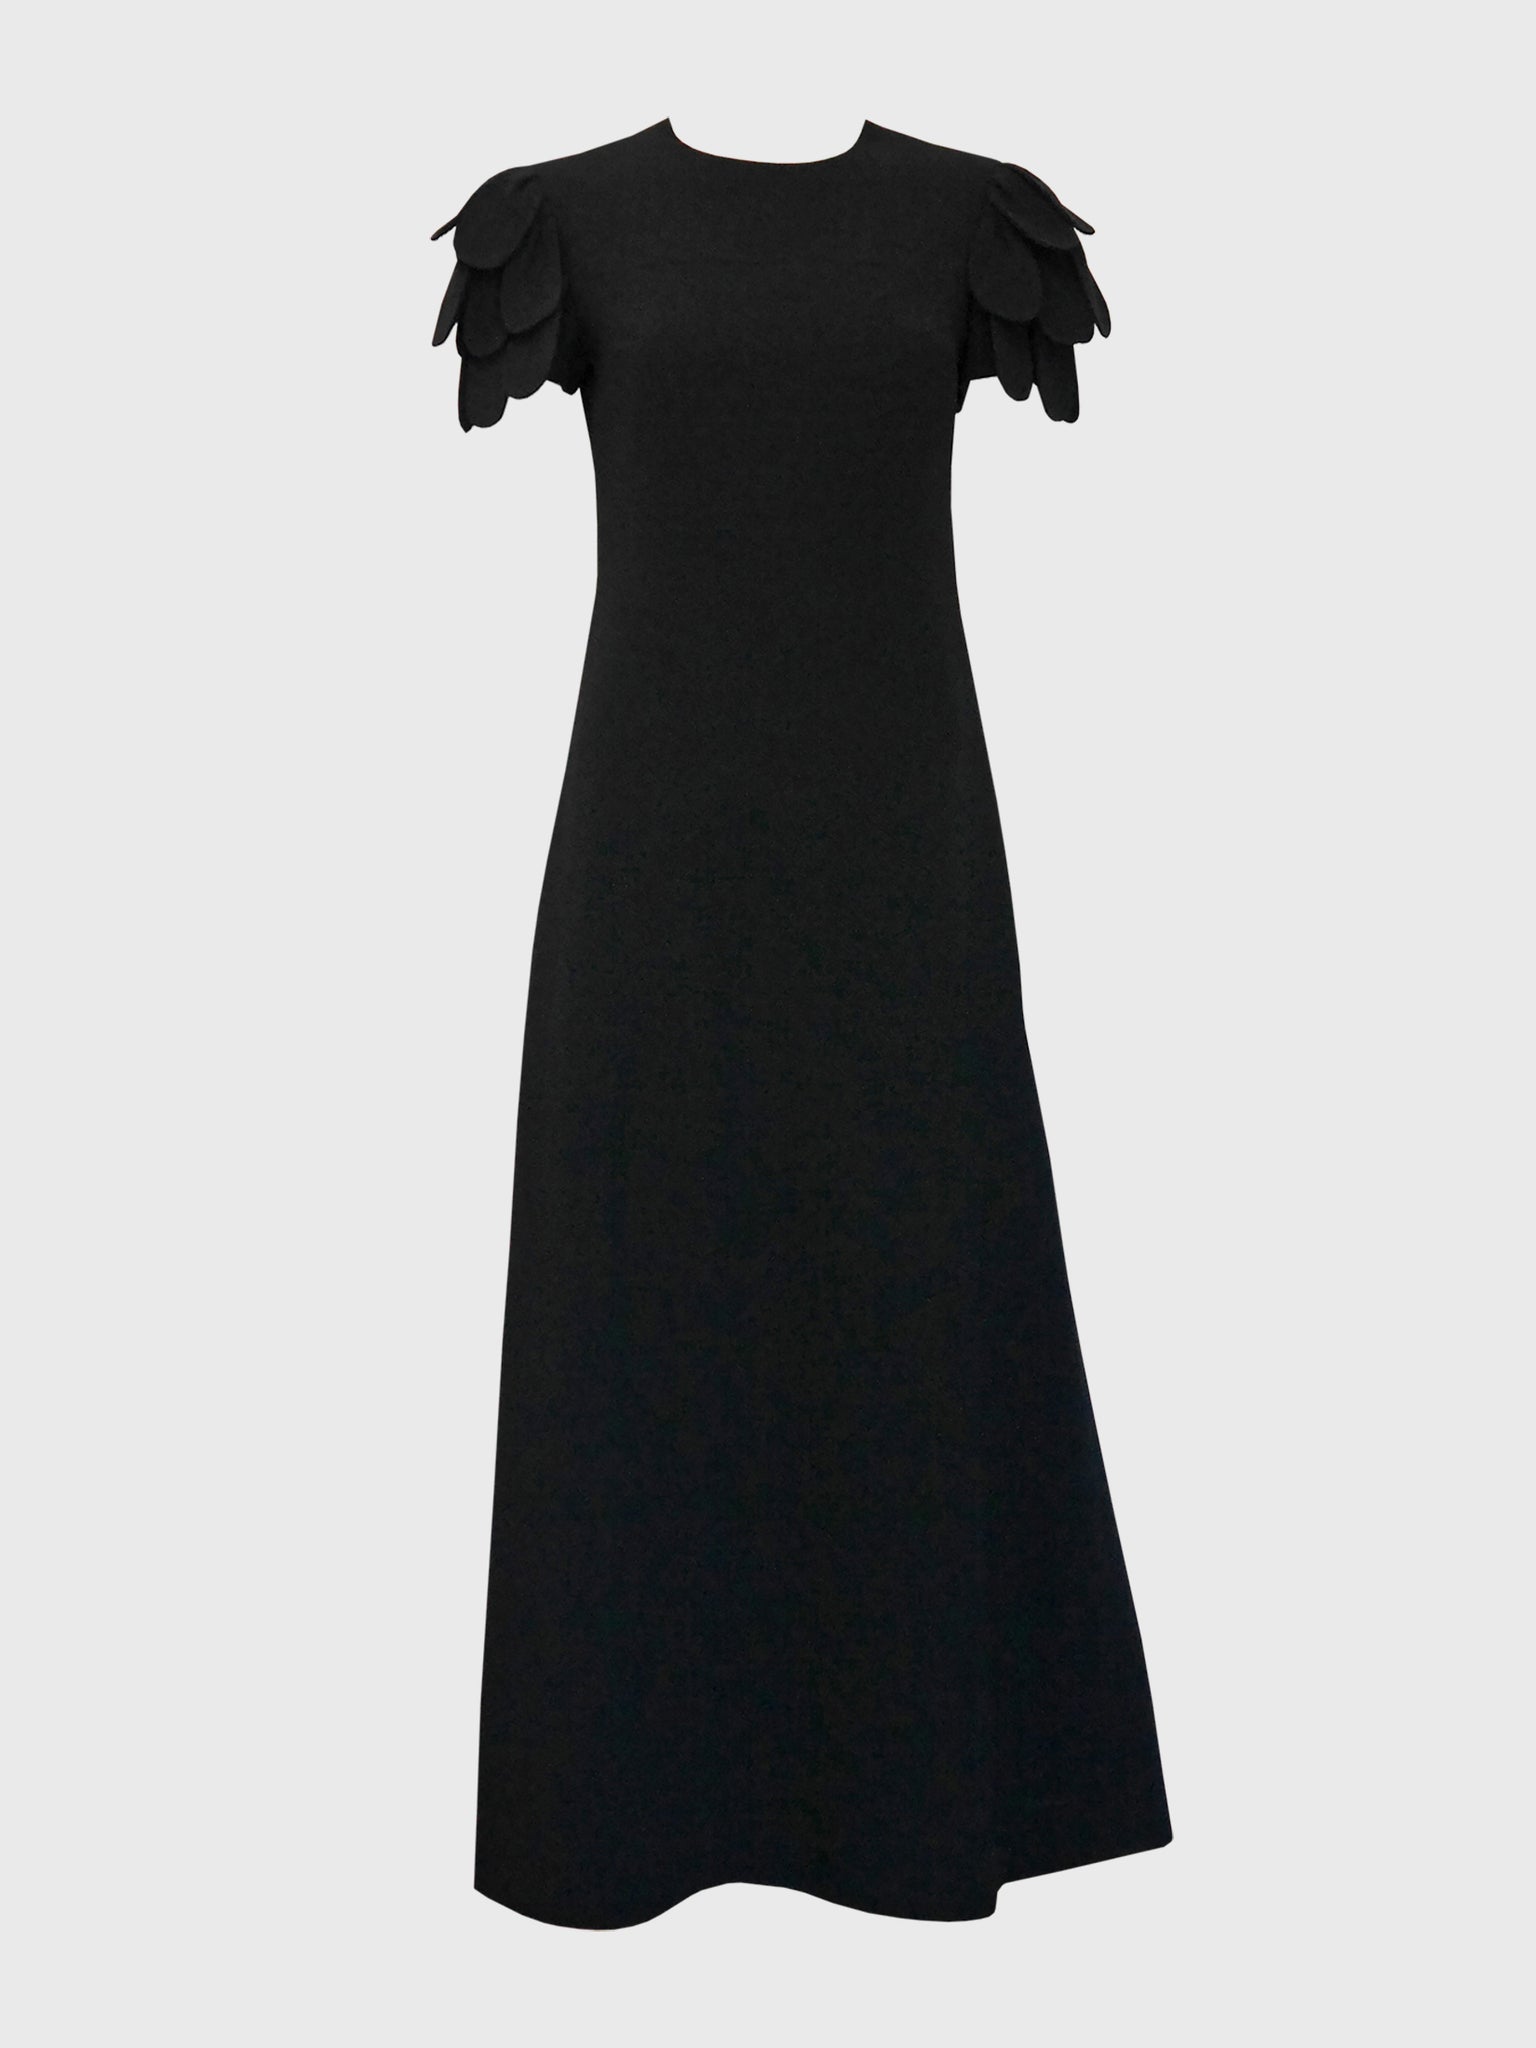 LOUIS FÉRAUD 1960s 1970s Vintage Black Evening Dress w/ Fish Scale or Petal Sleeves Size S // Sold